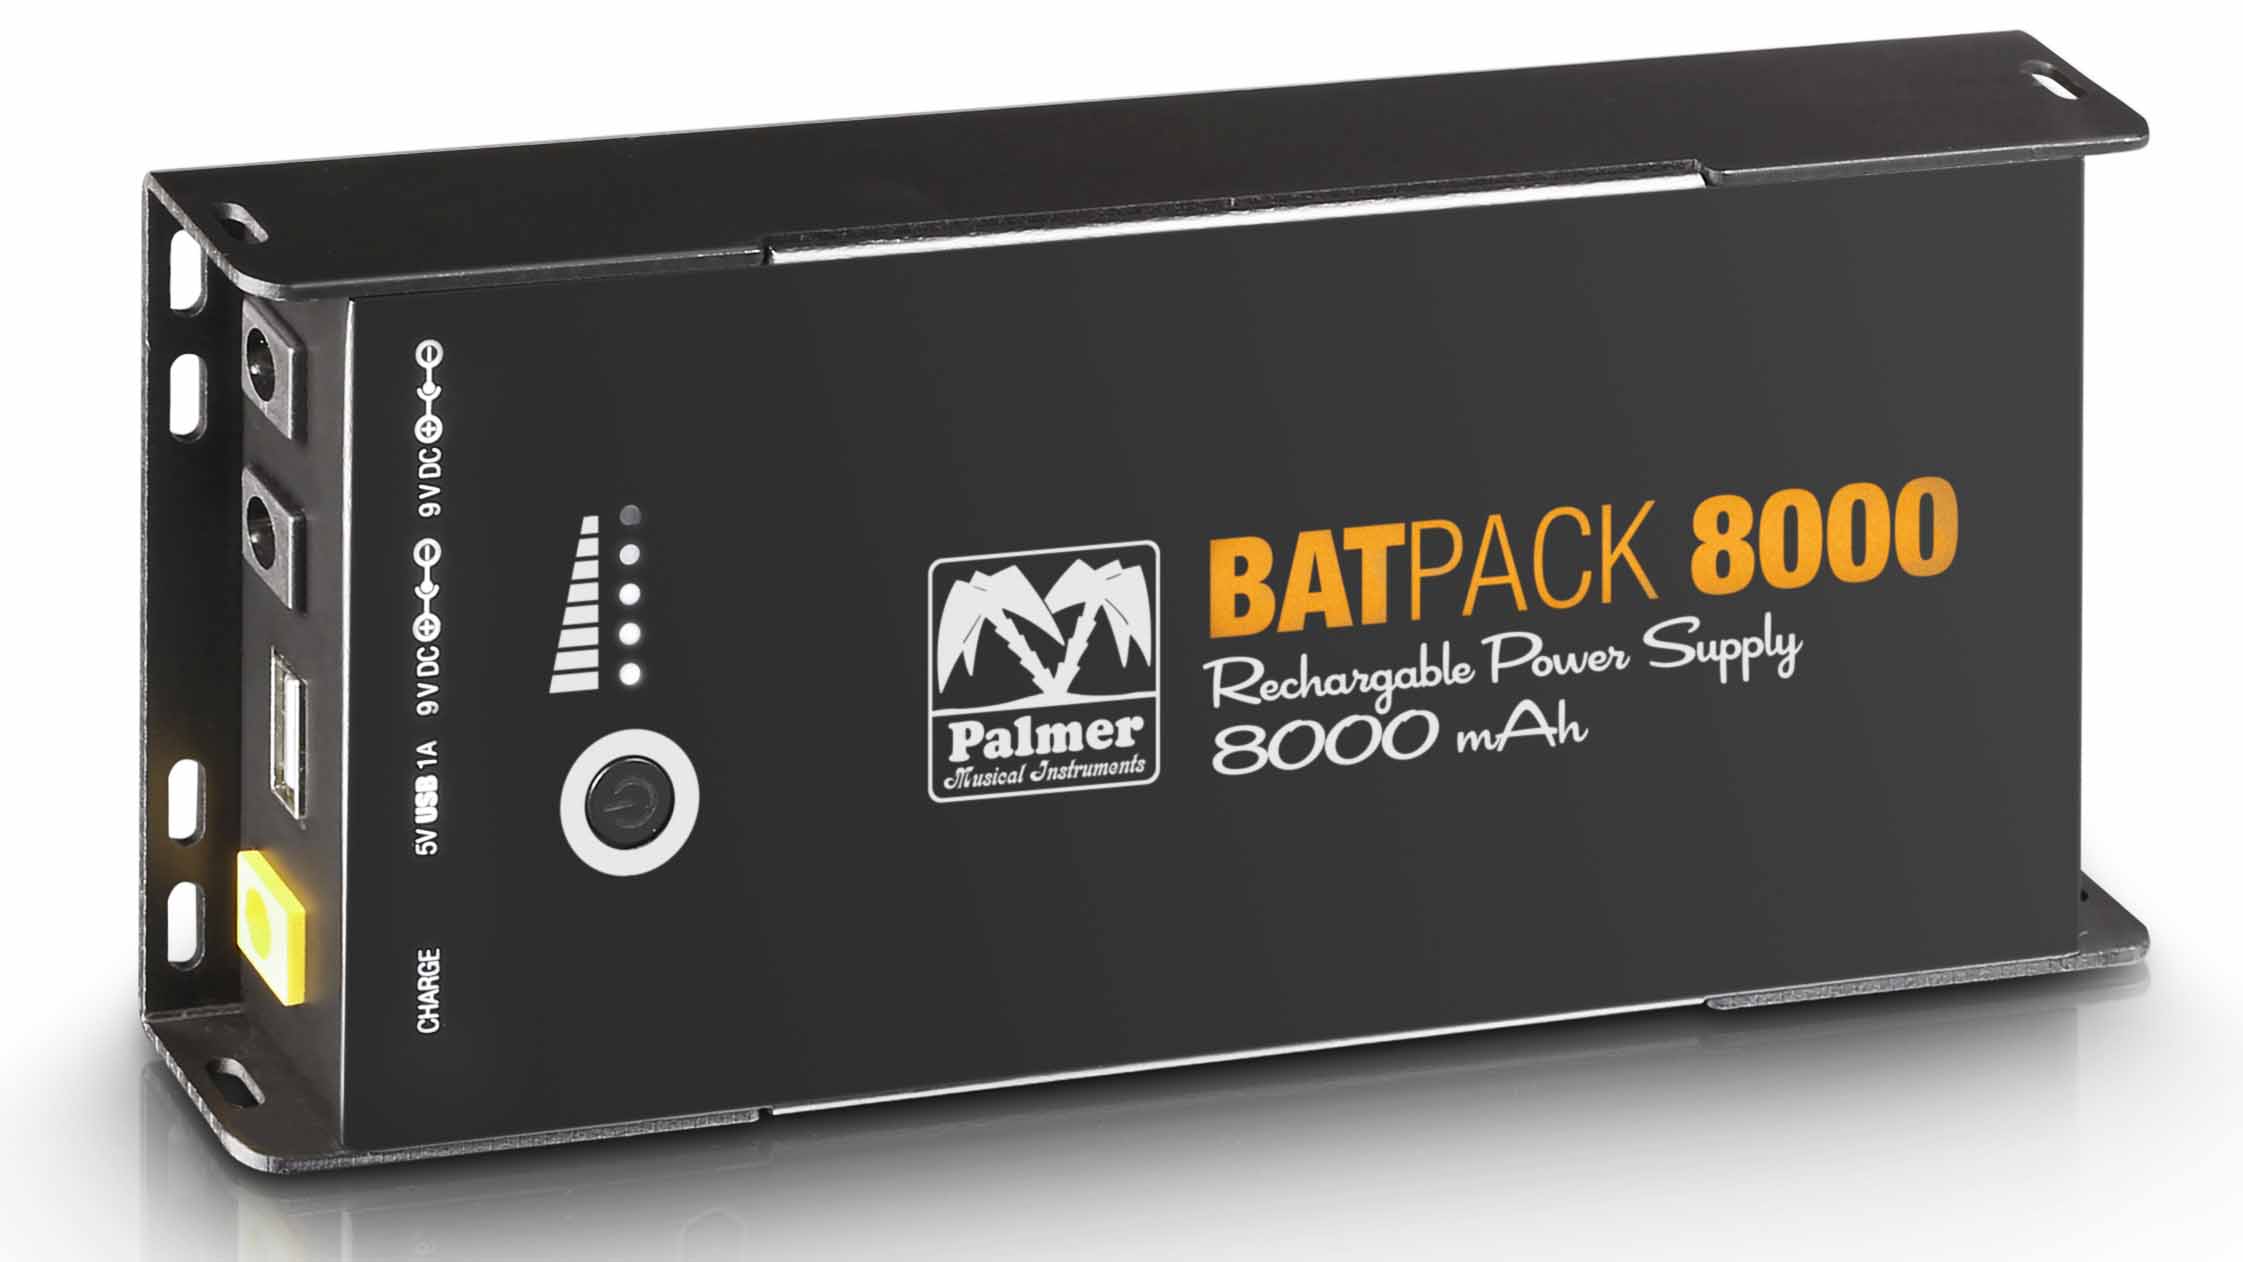 Battery power supply. Battery Power. Palmer Germany. Portable Pedal Power Supply. Блок питания m-Wave Pedal Power.